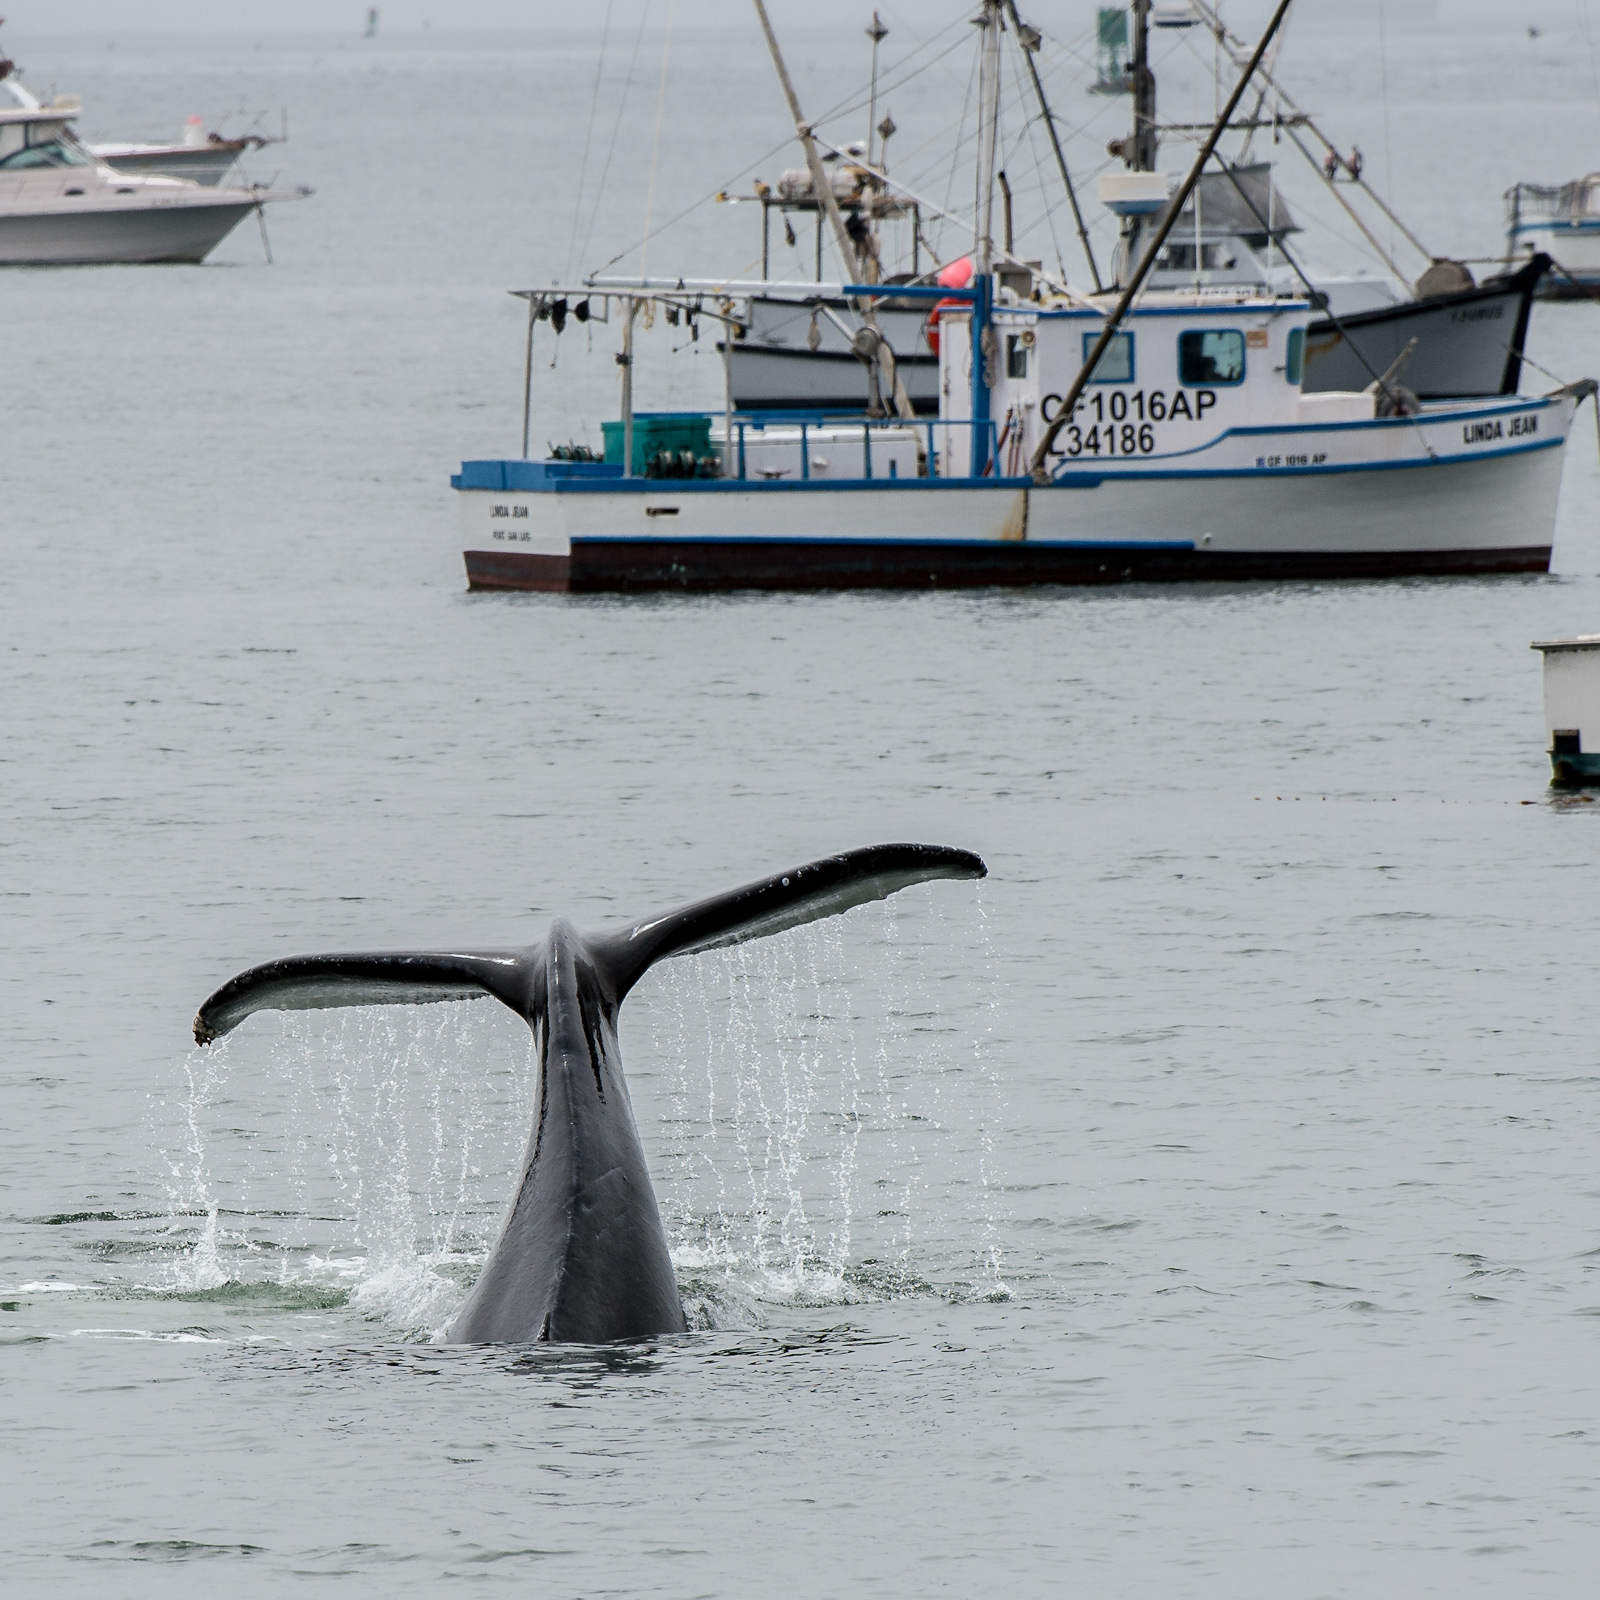 This was one of two Humpback whales that made a pass at the end of the pier in Port San Luis. While one was eating tons of anchovies, this one decided to just show its tail.